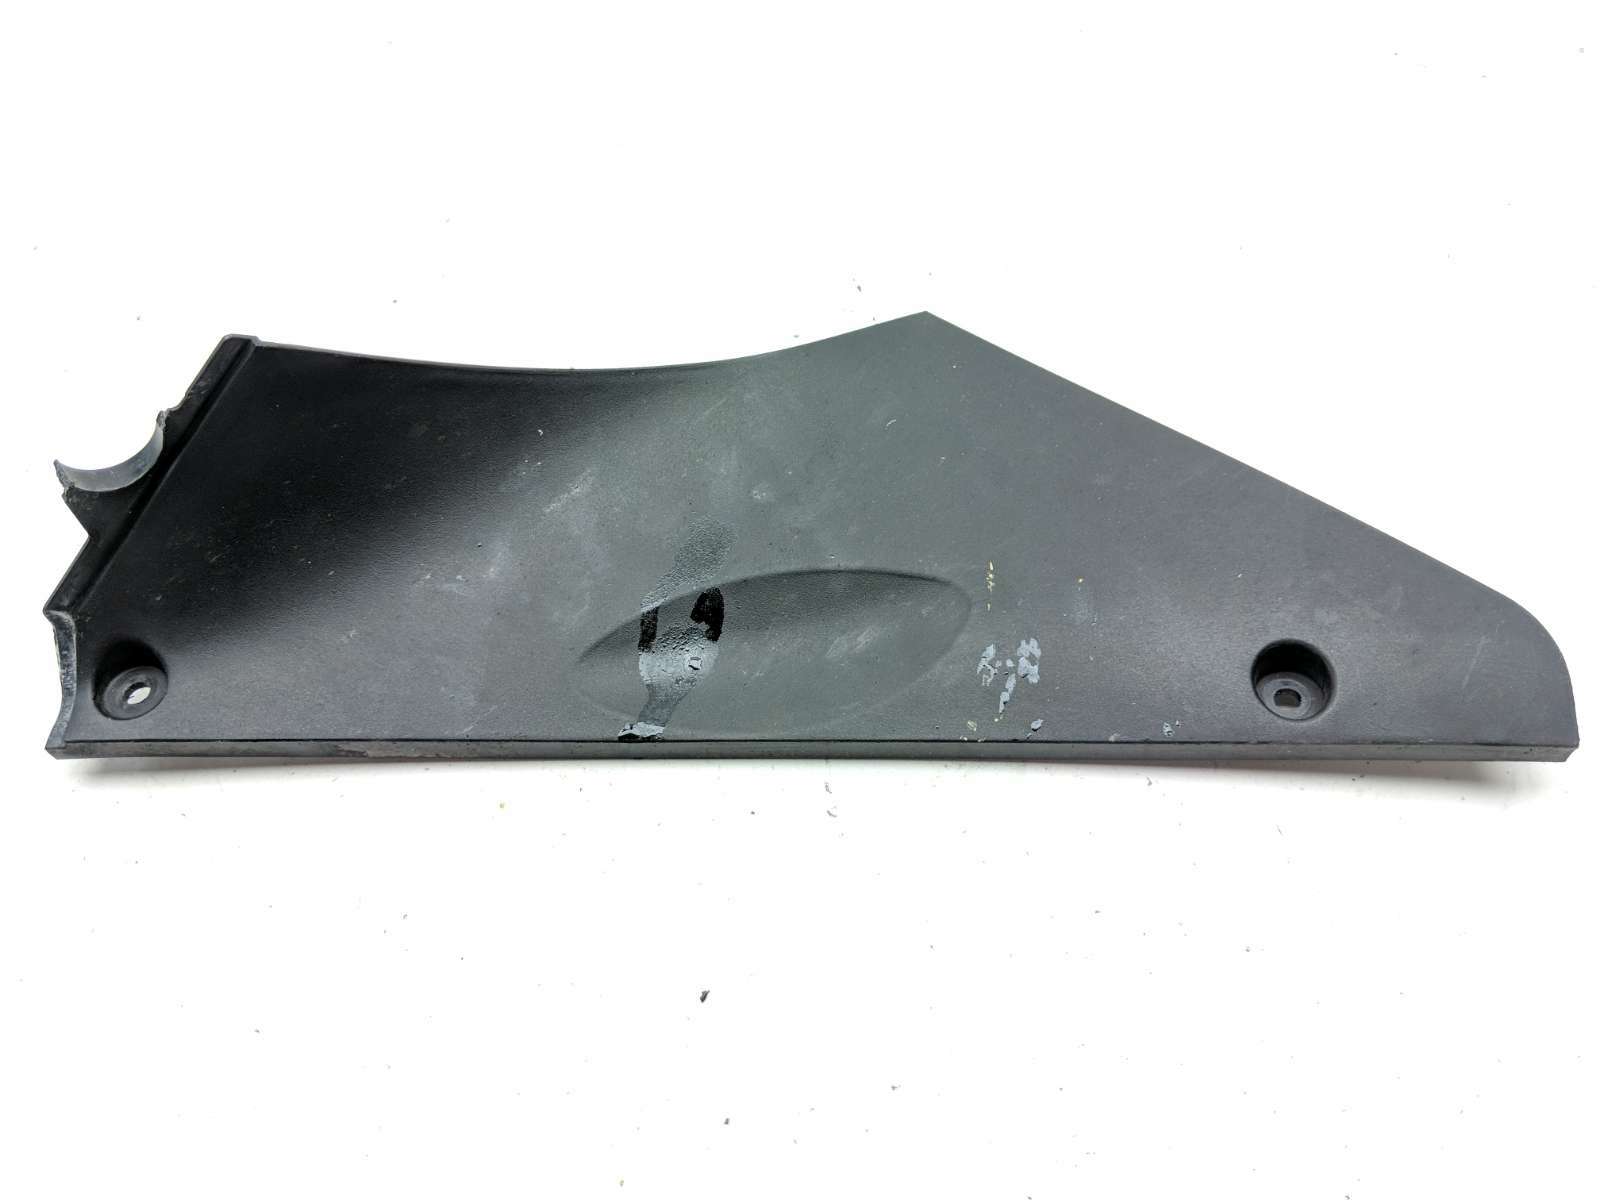 08 09 Kawasaki Concours ZG1400 Left Side Cover Panel Fairing  14091-0842